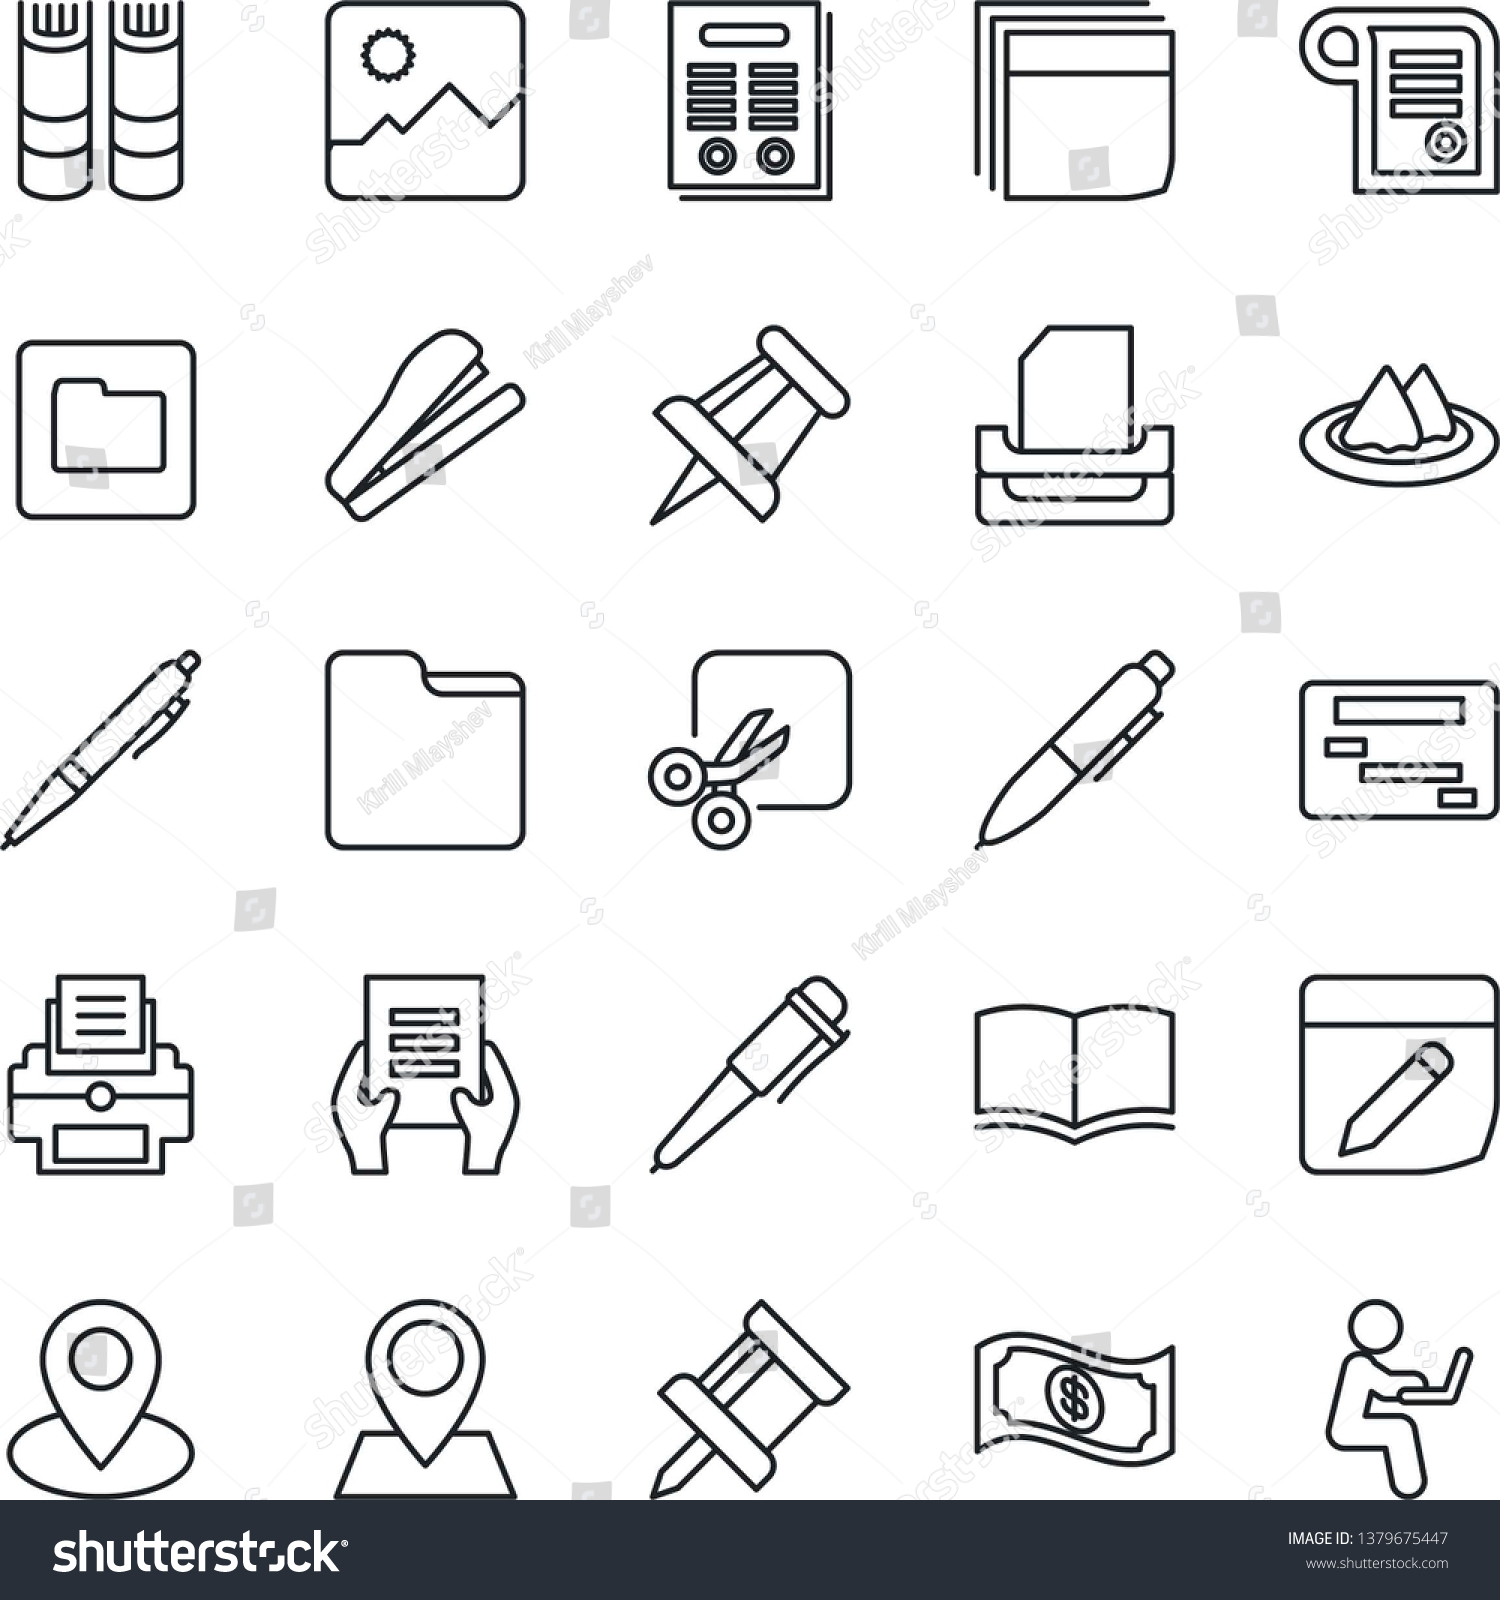 Thin Line Icon Set - book vector, pen, document, drawing pin, gallery, folder, notes, cut, blank box, printer, paper tray, contract, stapler, serviette, cash, schedule, man with notebook #1379675447